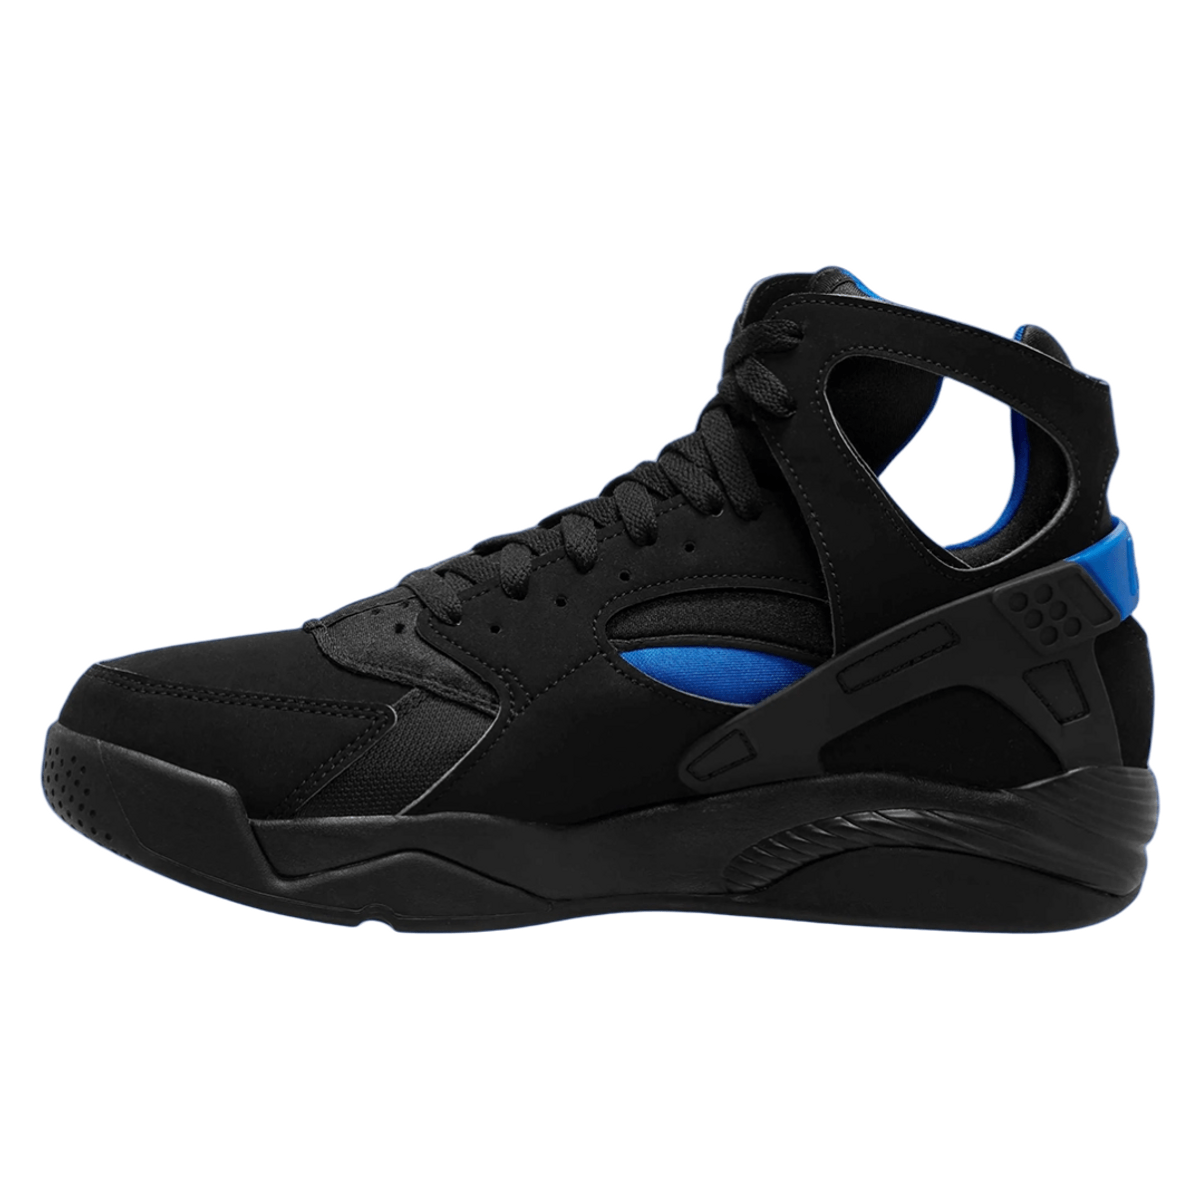 The Nike Air Flight Huarache Is Getting The Royal And Black Treatment In 2023